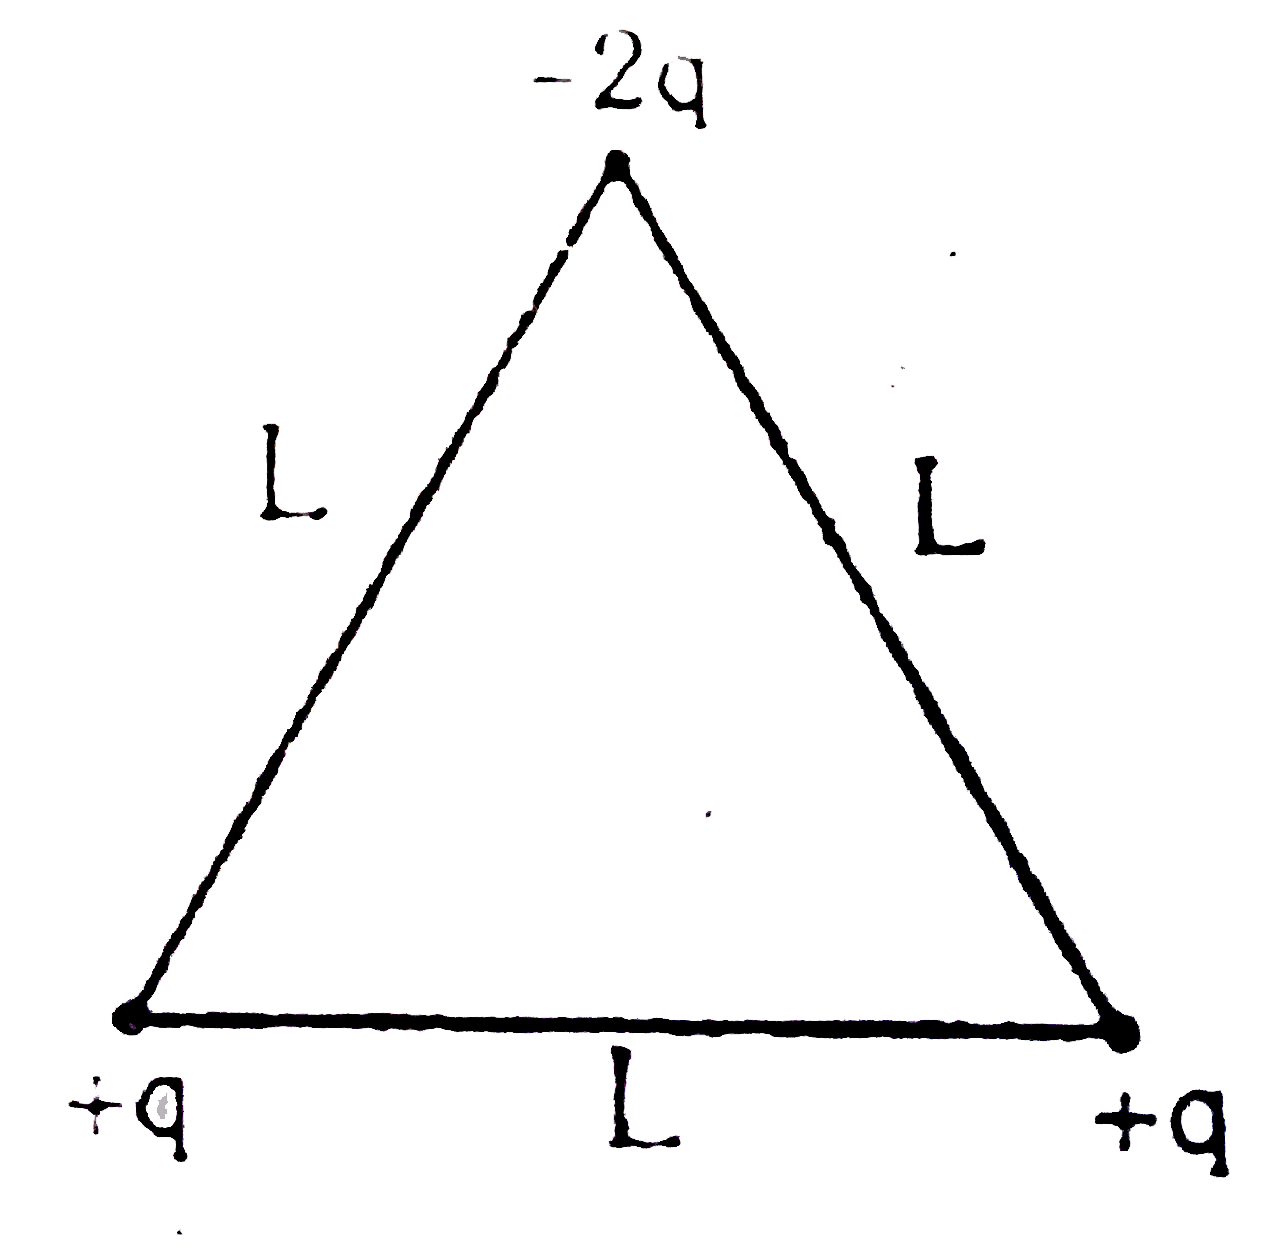 Three points charges are placed at the corners of an equilateral triangle of side L as shown in the figure: